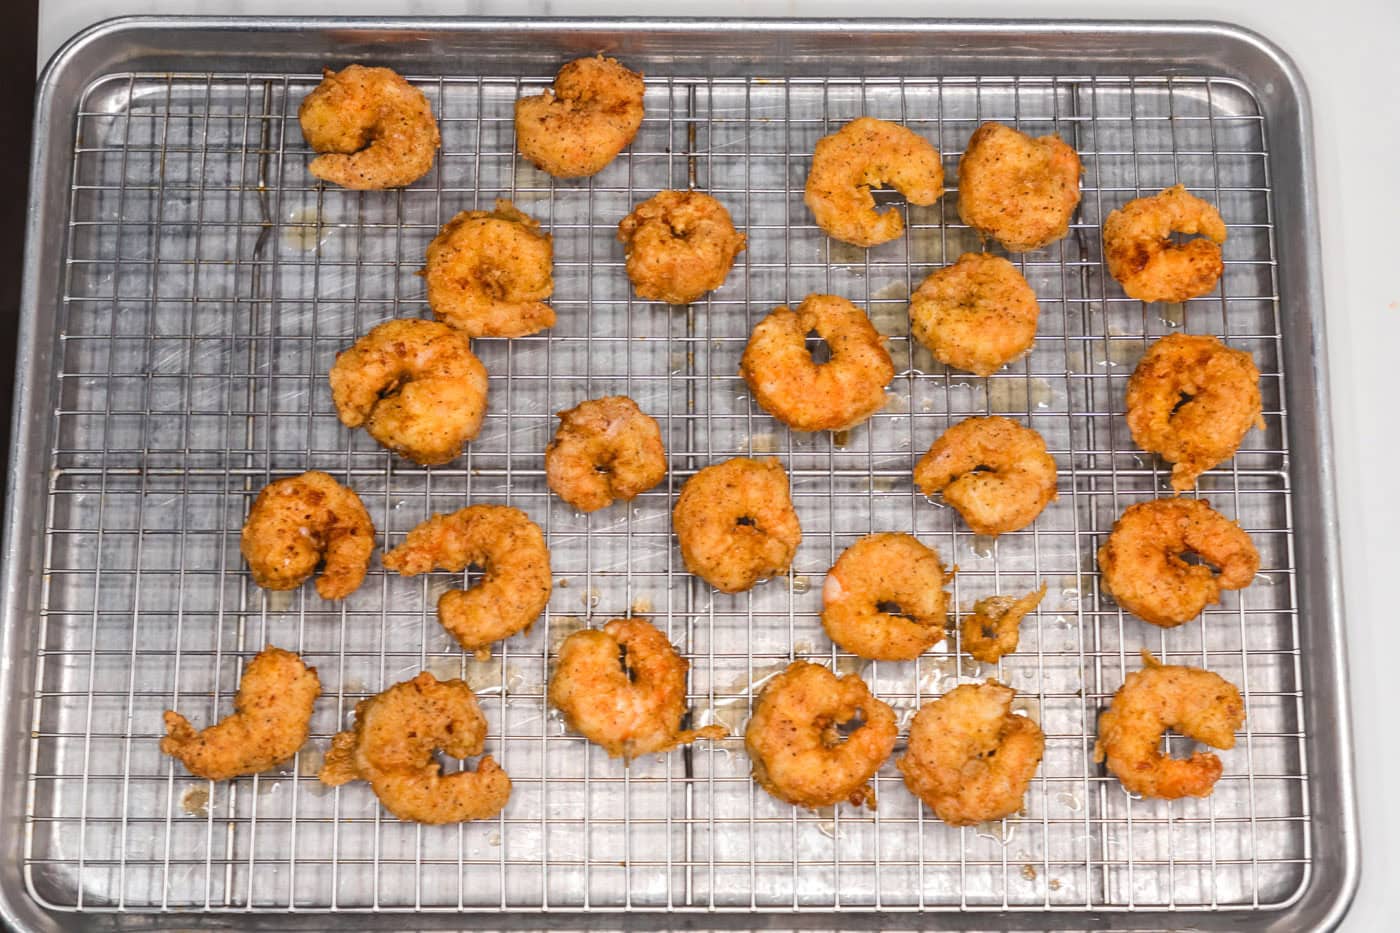 fried shrimp on a wire rack draining